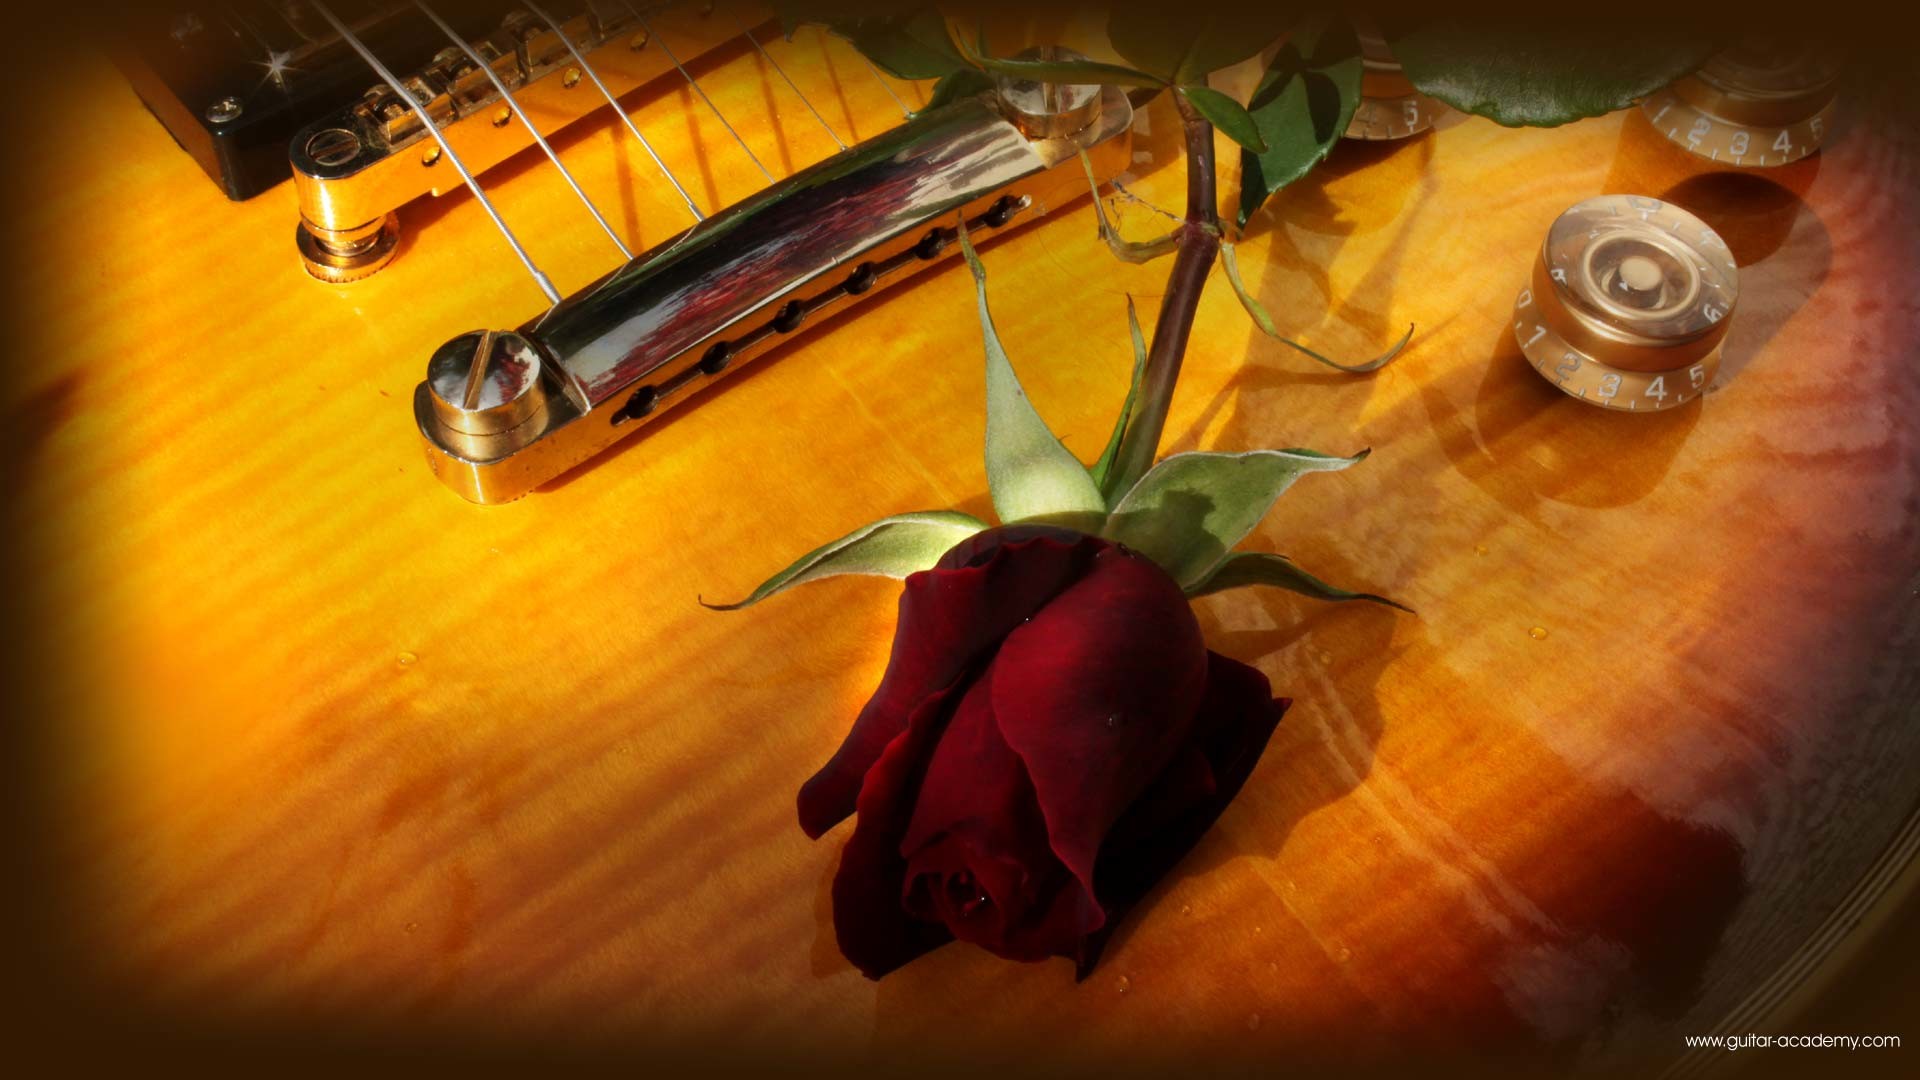 1920x1080 Guitar wallpaper, romantic looking Gibson Les Paul and red rose